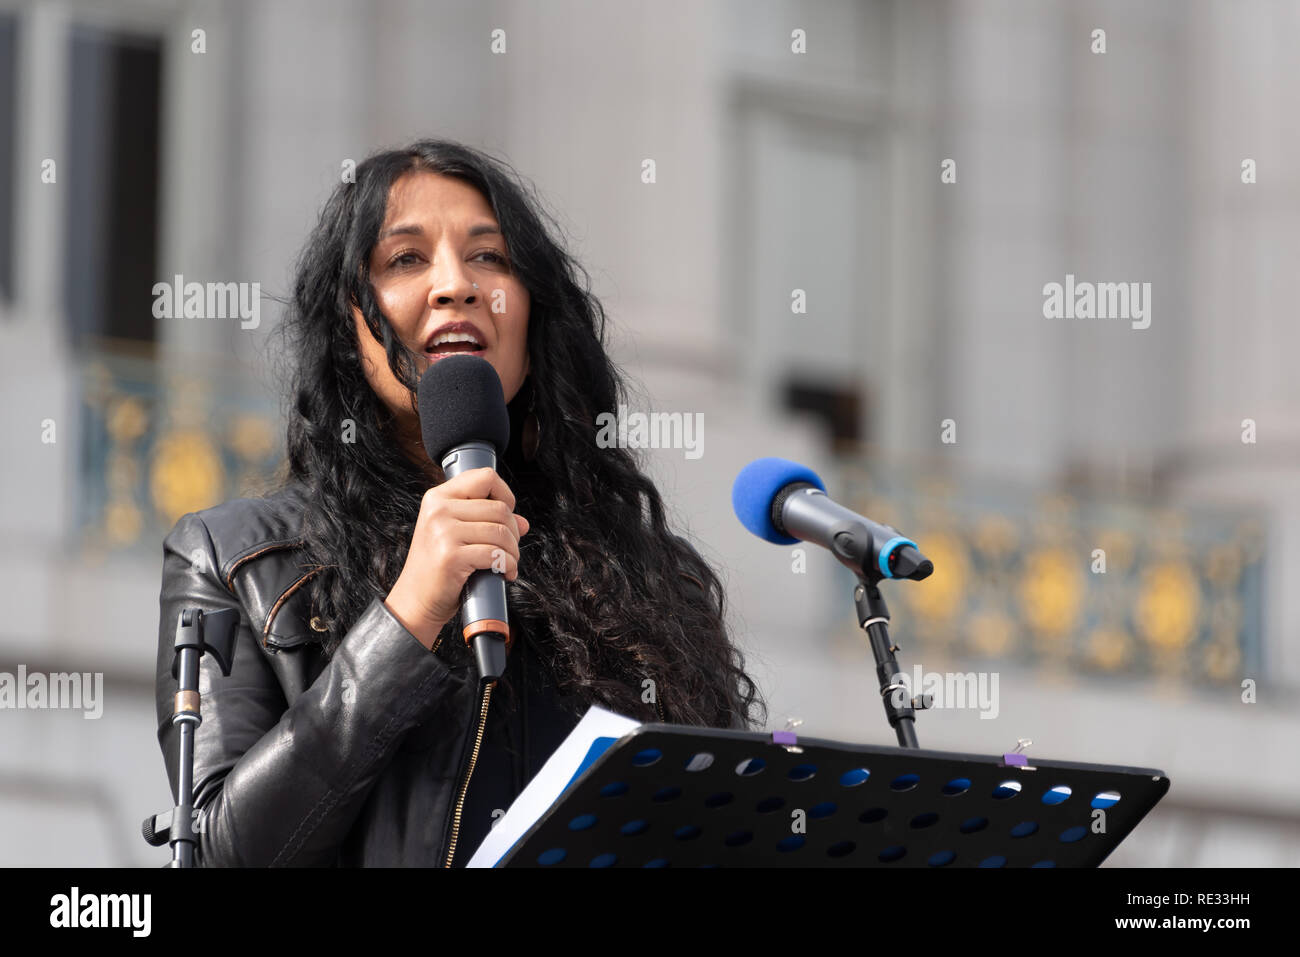 San Francisco, USA. 19th January, 2019. The Women's March San Francisco begins with a rally at Civic Center Plaza in front of City Hall. Writer and consultant Natasha Singh, who works closely with Asha Rising, Freedom forward, and Center for Domestic Peace, addresses the crowd. Her writing has appeared in The Atlantic, The New York Times and several anthologies. Credit: Shelly Rivoli/Alamy Live News Stock Photo